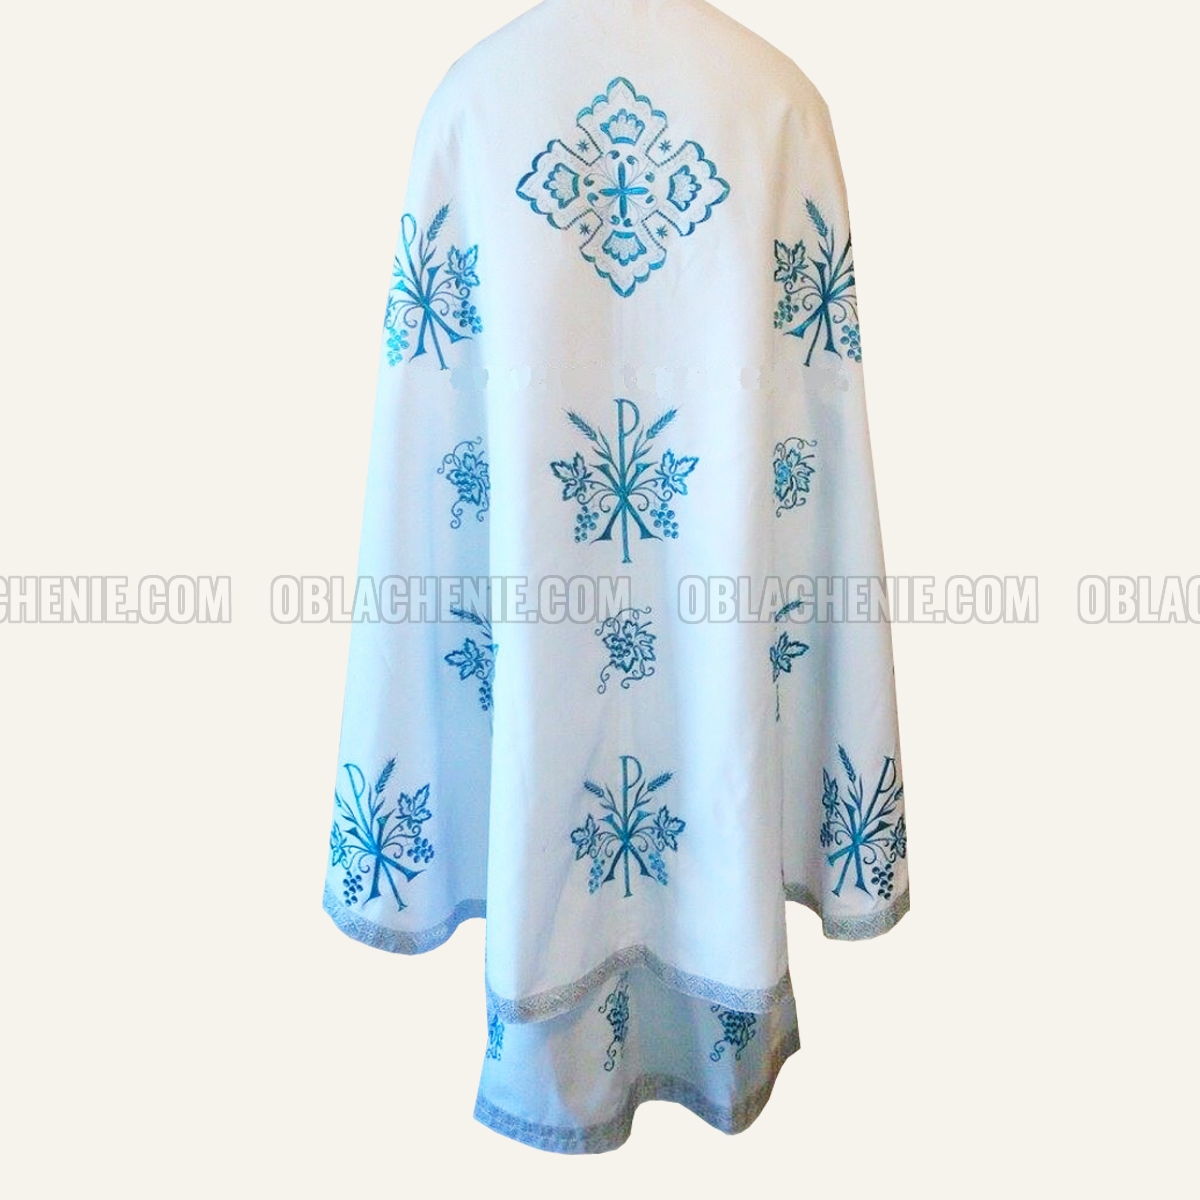 Embroidered priest's vestments 10258